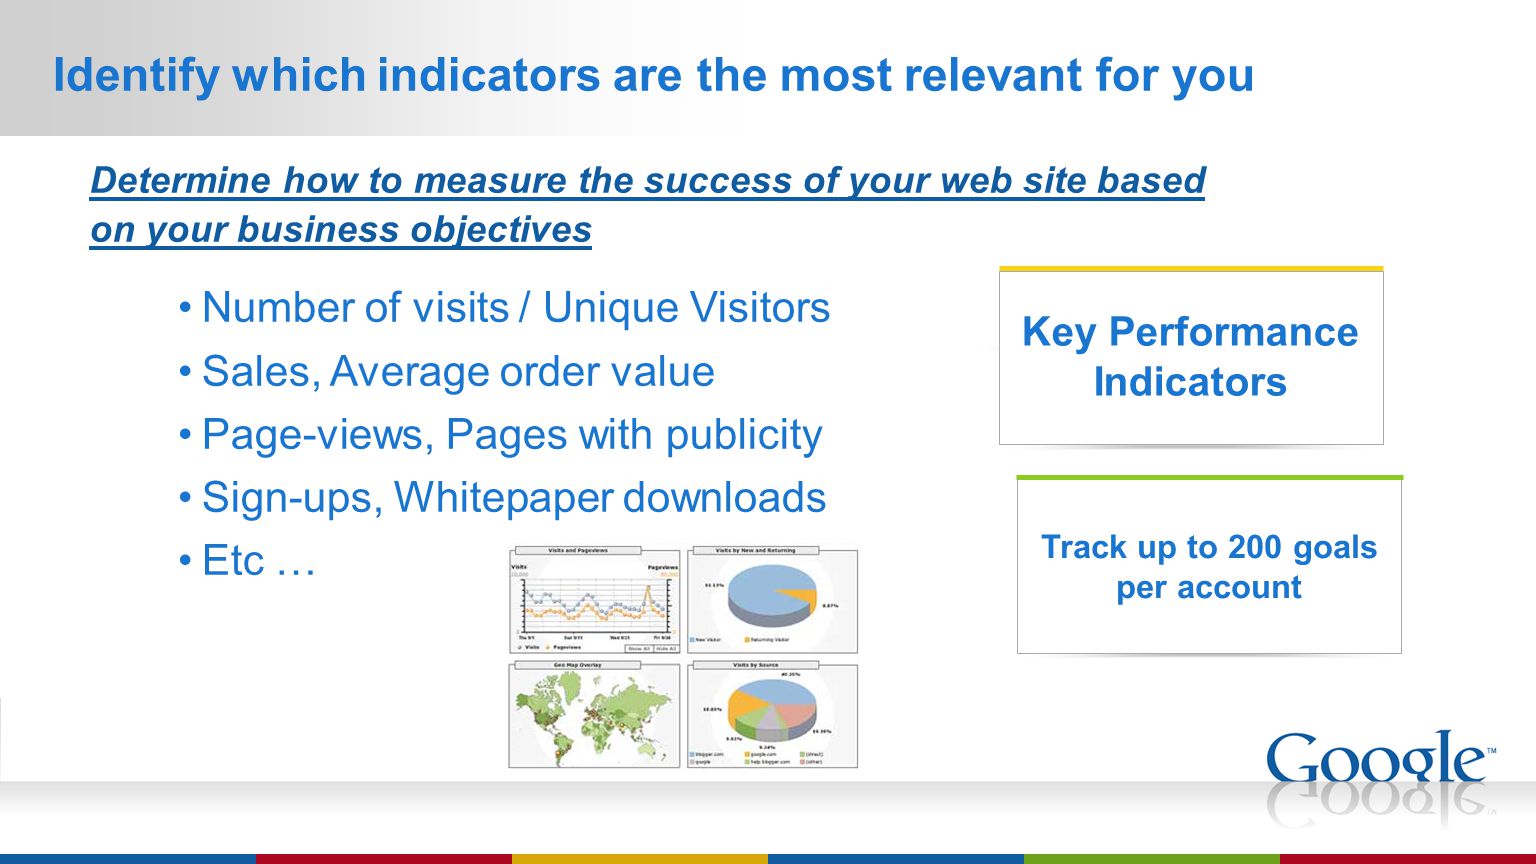 Identify which indicators are the most relevant for you Determine how to measure the success of your web site based on your business objectives Track up to 200 goals per account Key Performance Indicators Number of visits / Unique Visitors Sales, Average order value Page-views, Pages with publicity Sign-ups, Whitepaper downloads Etc …